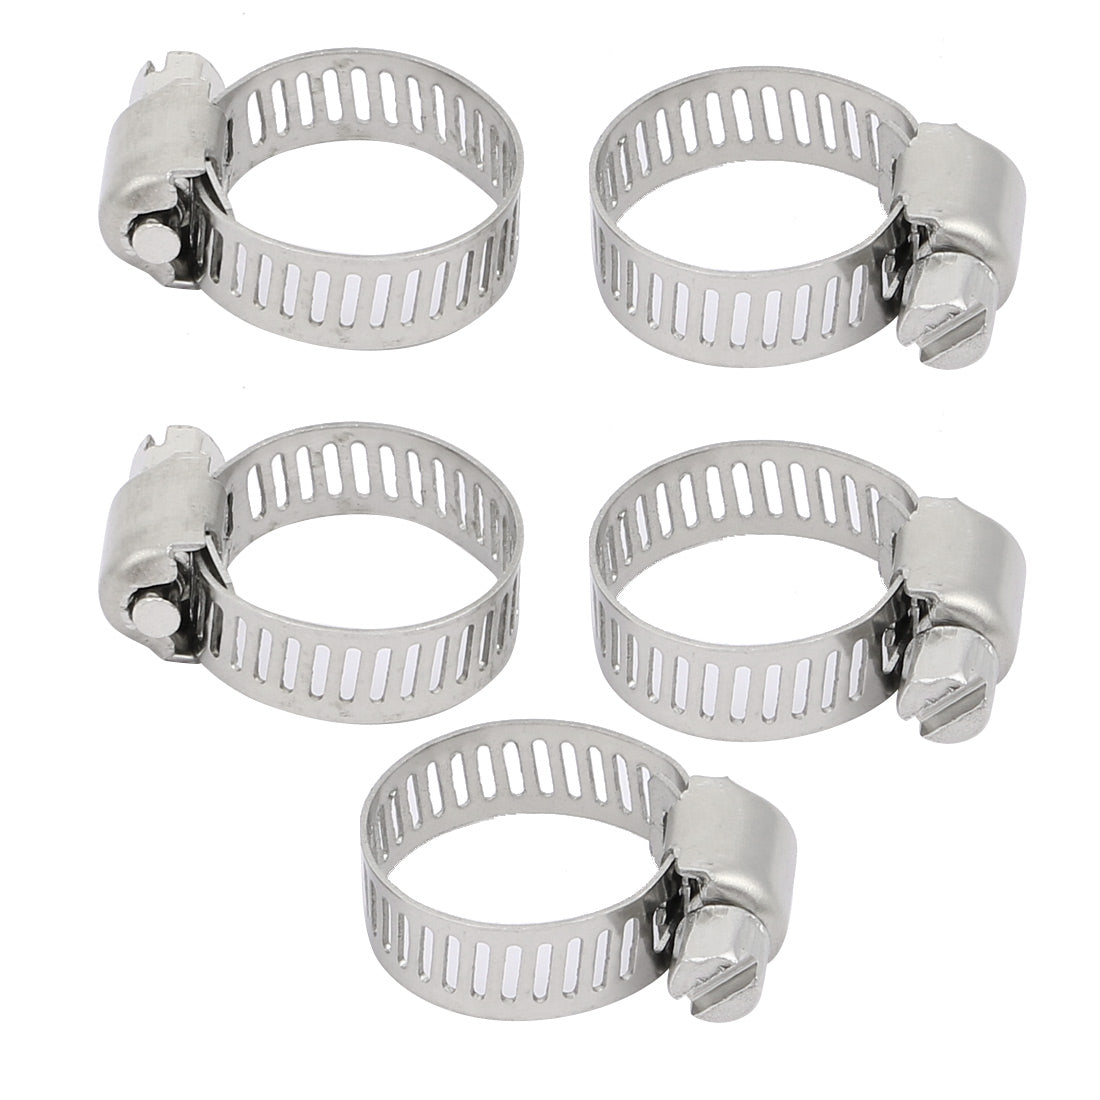 uxcell Uxcell 5 Pcs 10mm to 16mm Clamping Range 8mm Width Metal Adjustable Hose Clamp Hoop